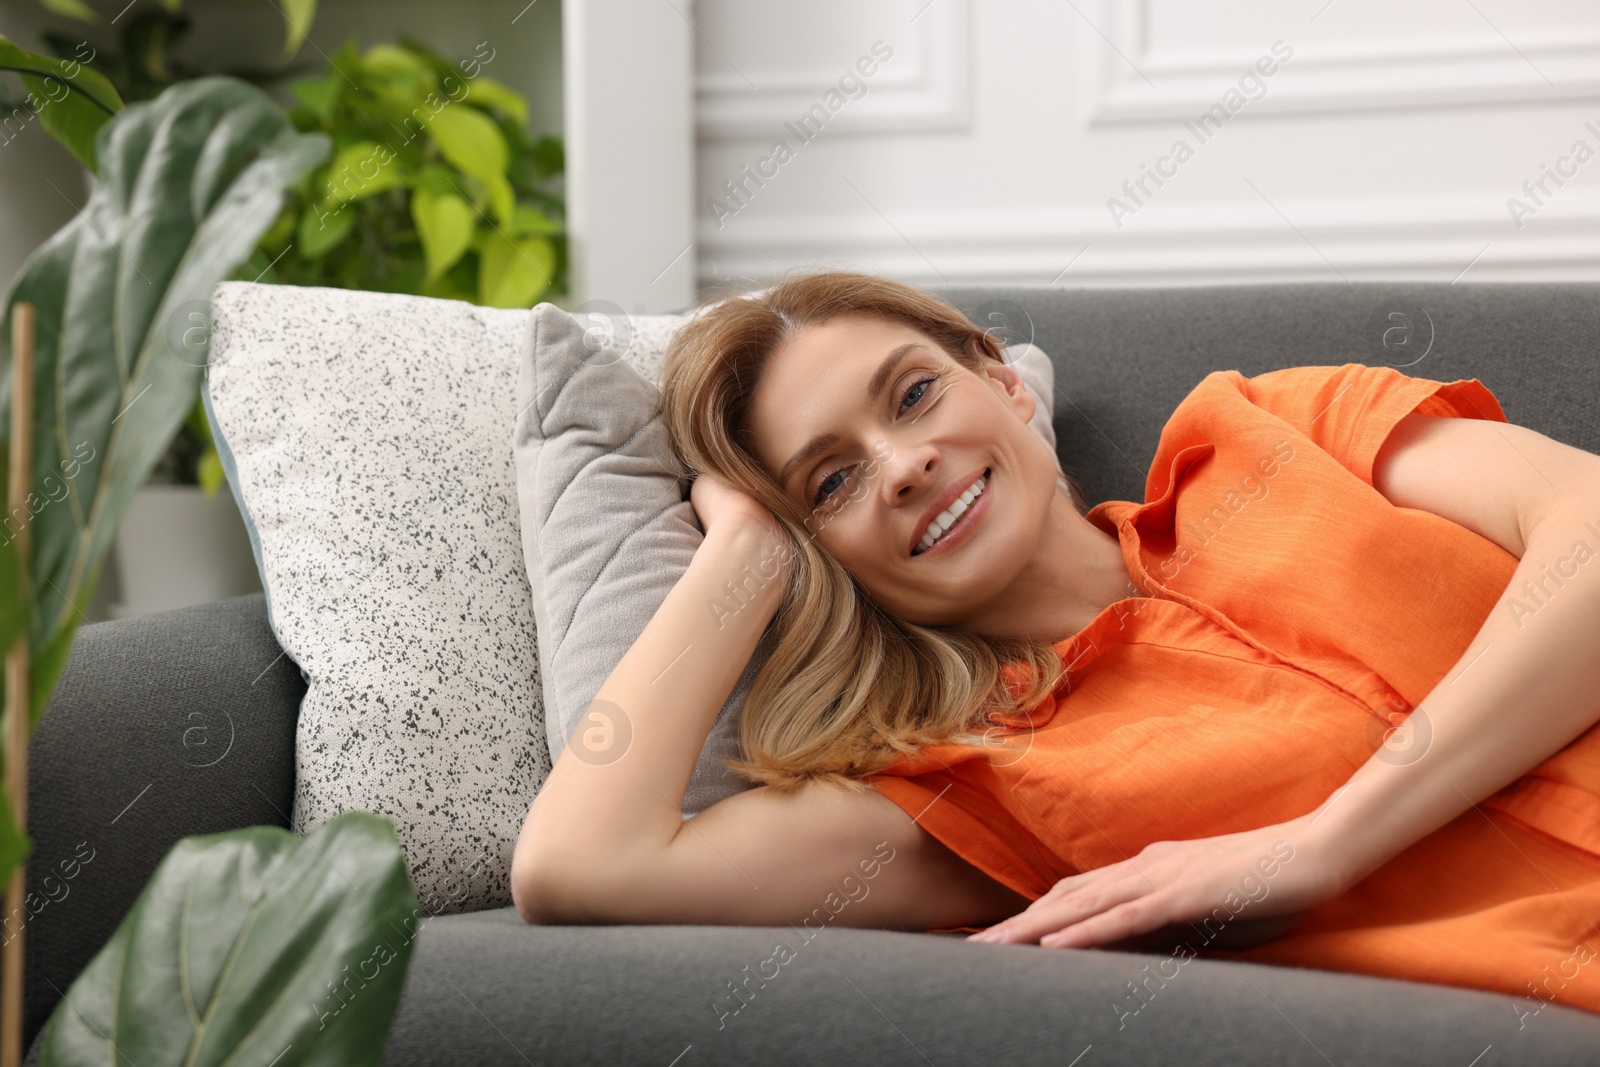 Photo of Woman relaxing on sofa in room with green houseplants